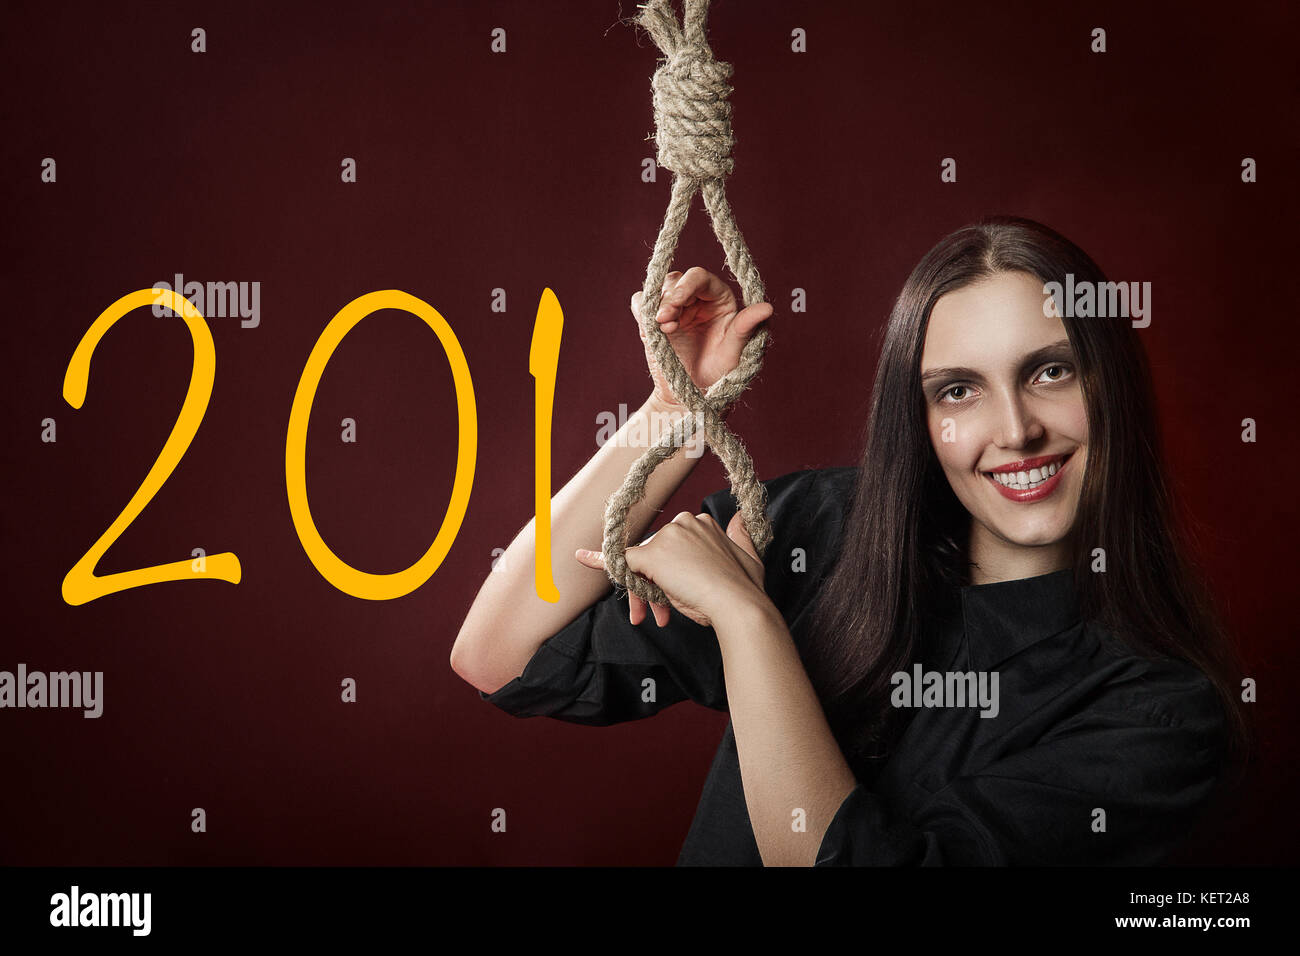 fun woman show noose with 2018 new year digits Stock Photo